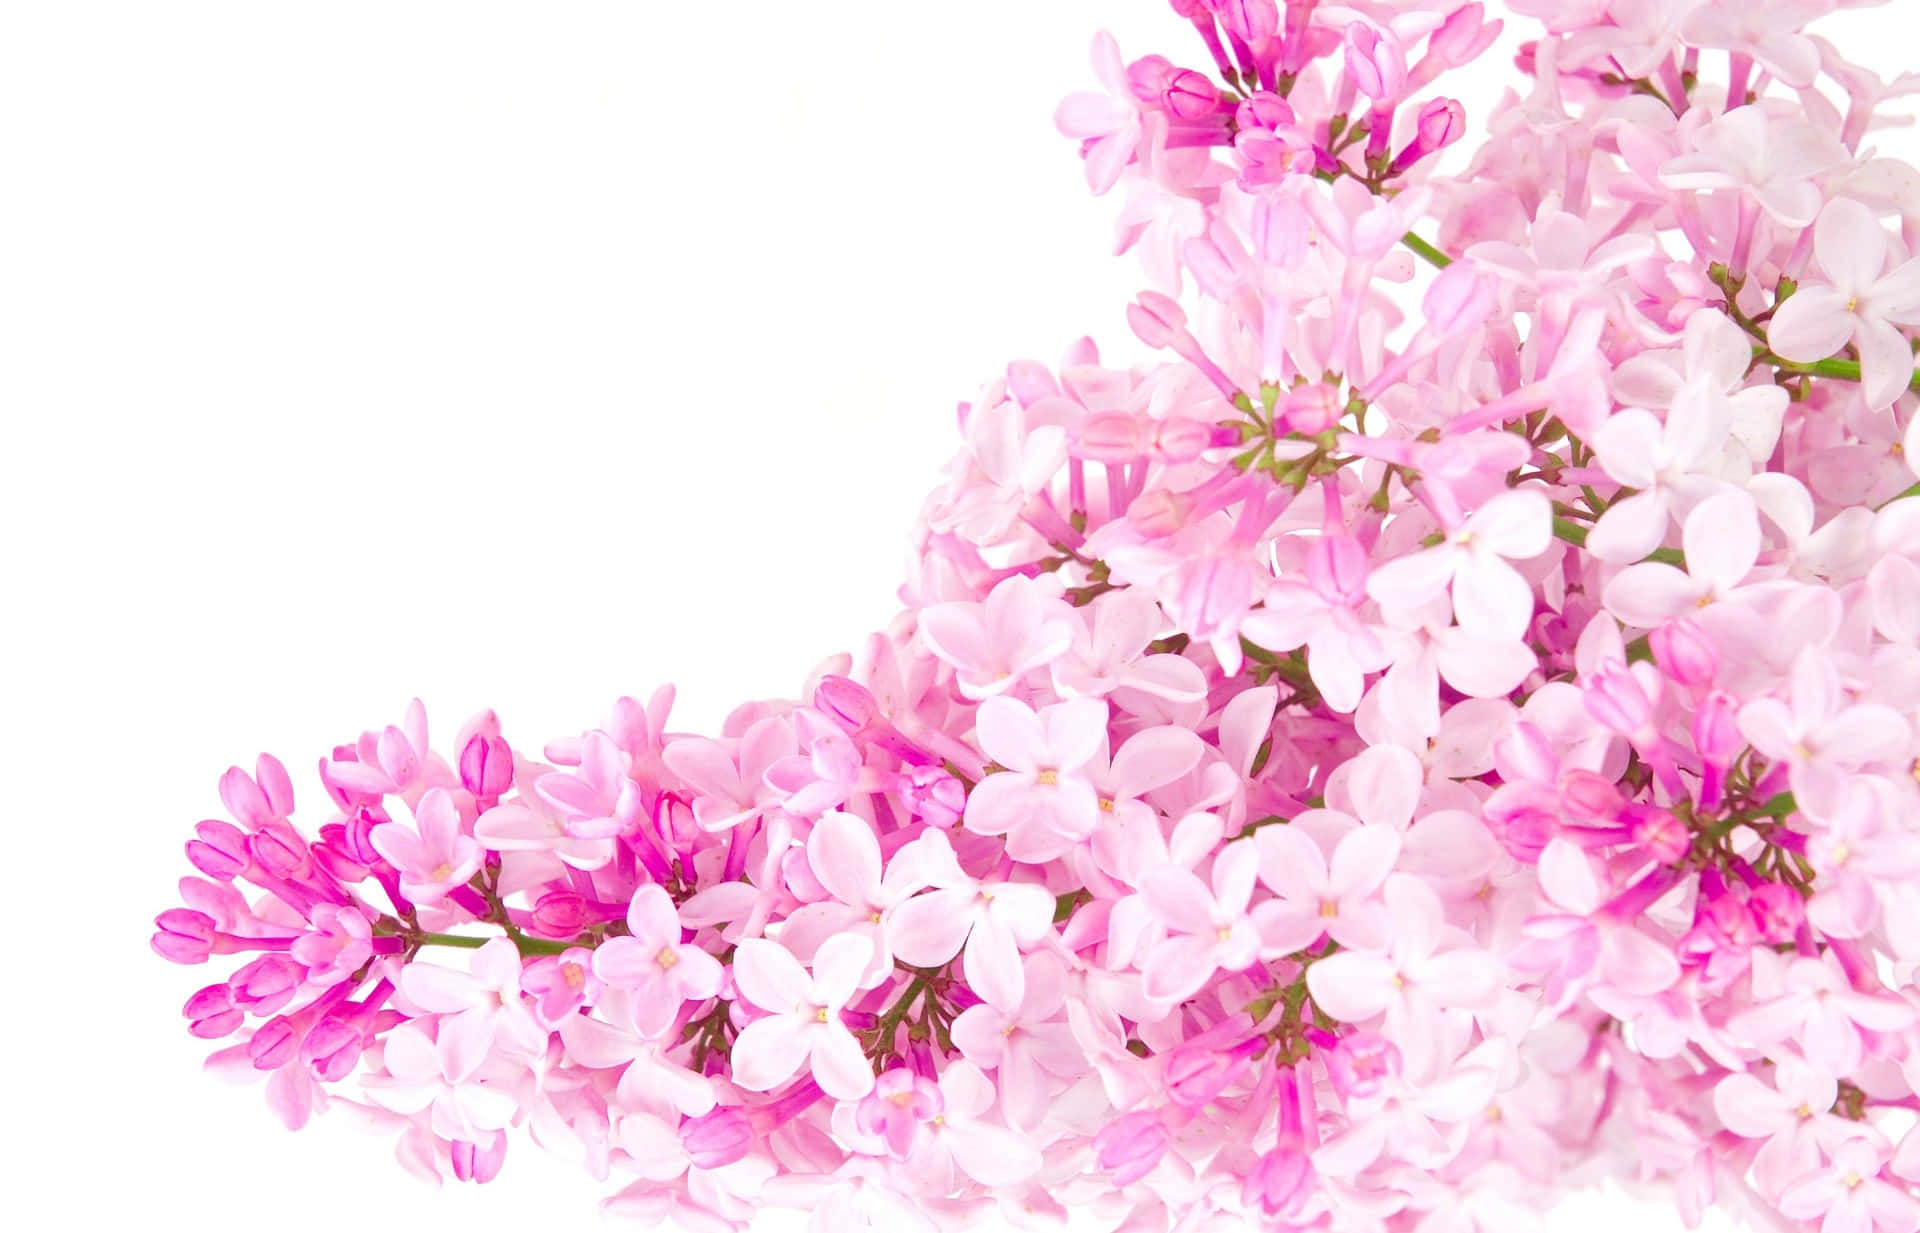 A Bouquet Of Pink Flowers On A White Background Wallpaper